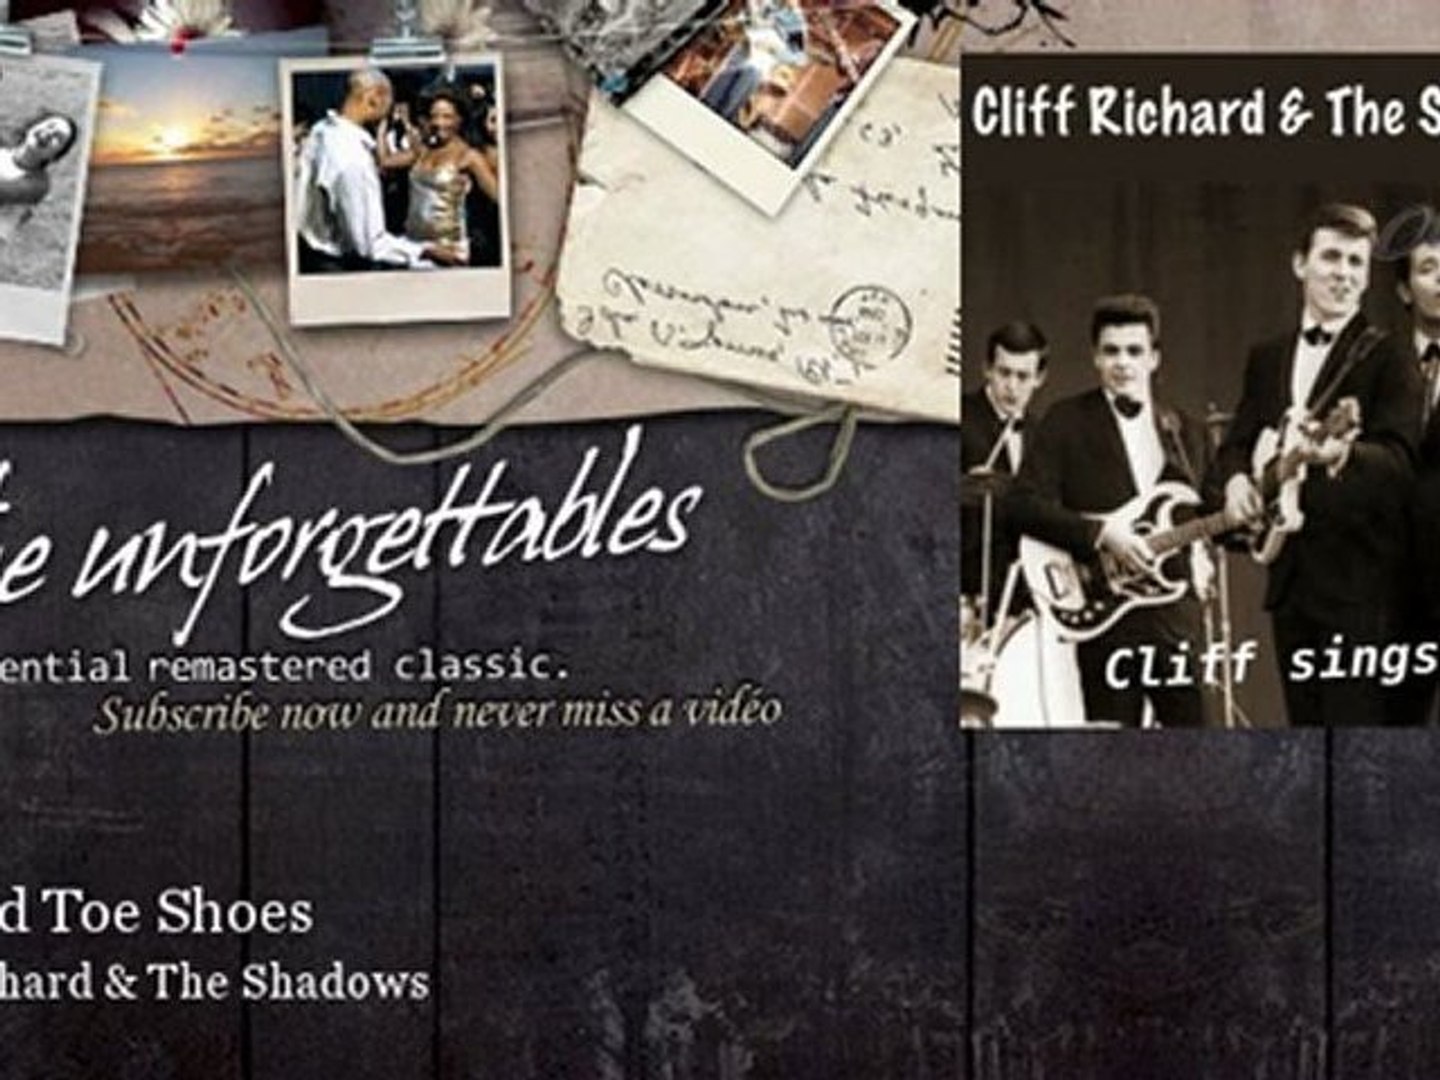 ⁣Cliff Richard & The Shadows - Pointed Toe Shoes